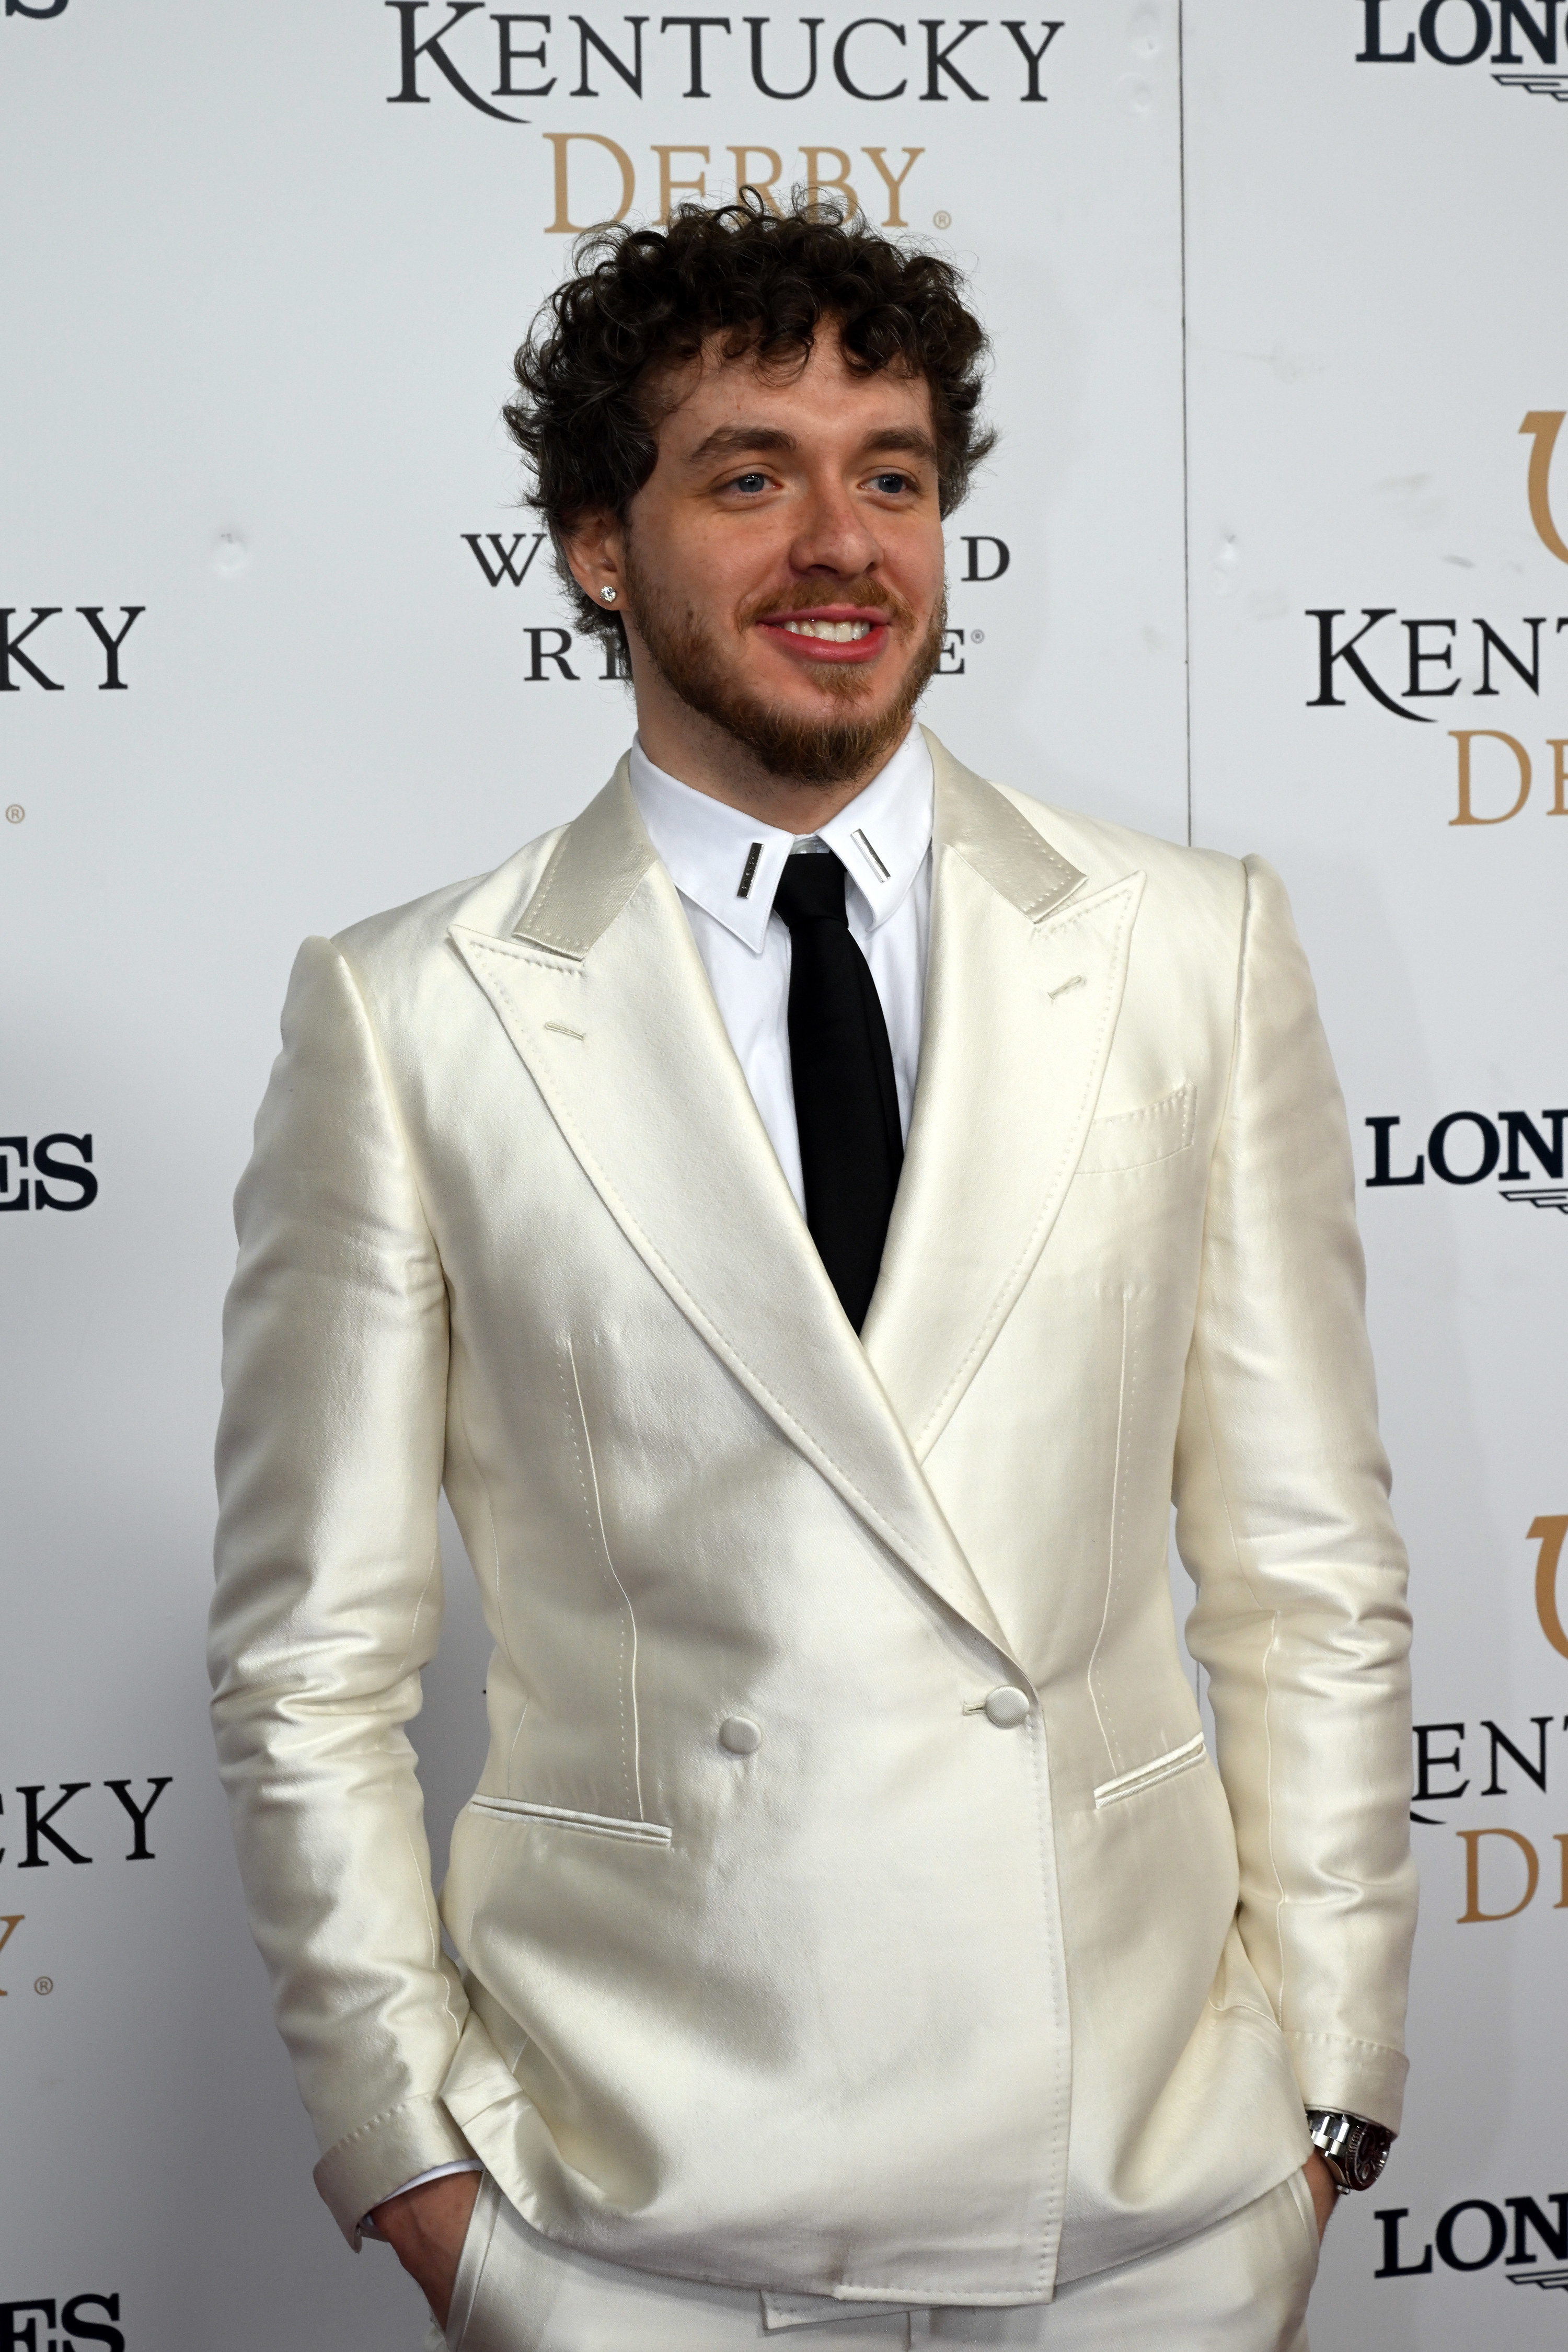 Jack in a white satin suit